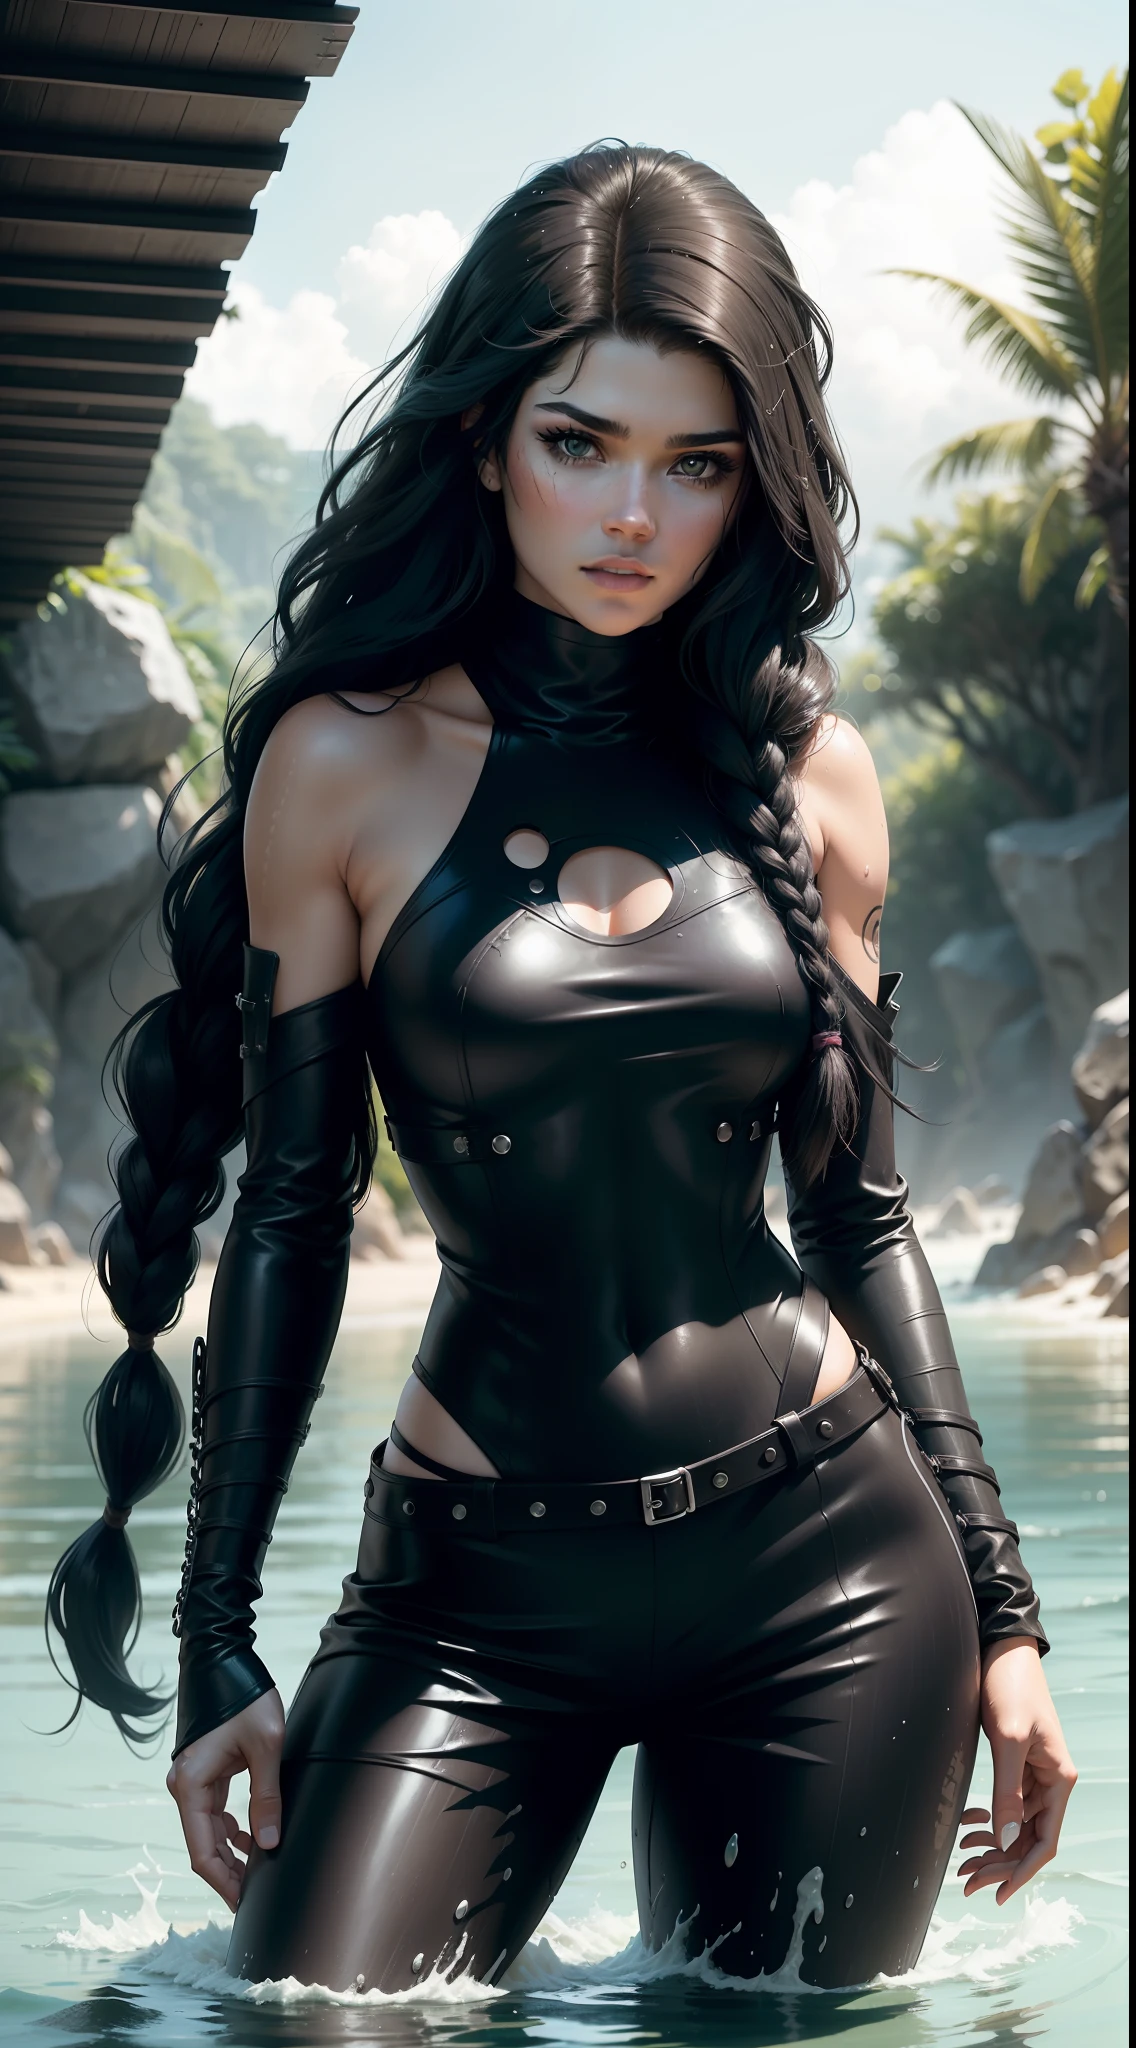 Solo, Octavia Blake (Marie Avgeropoulos, long black hair with braids on top, eyeliner, makeup, shine), onepiece leather armor, shoulders showing, swimming on a beach on the edge of the jungle, wet, wet hair, splashes of water, depth of field, night